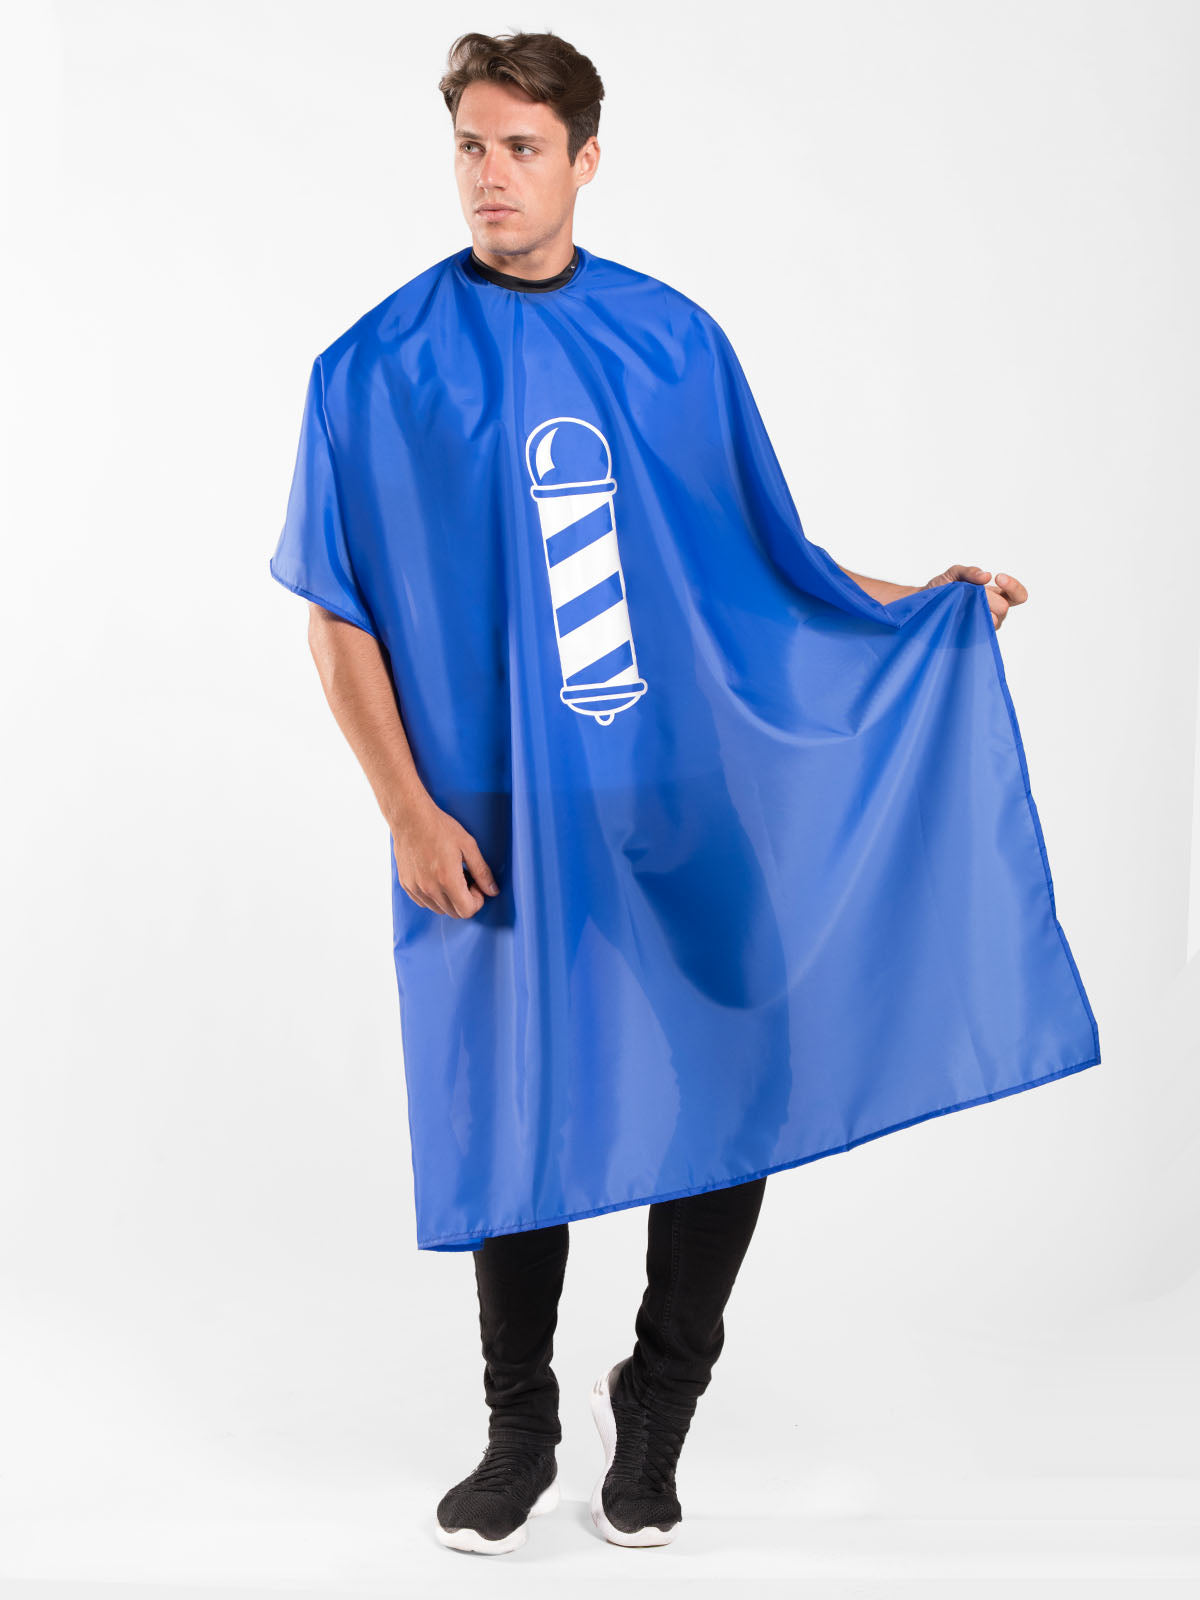 Barber Cape, Very good quality, One size fits all, nice colorful design.